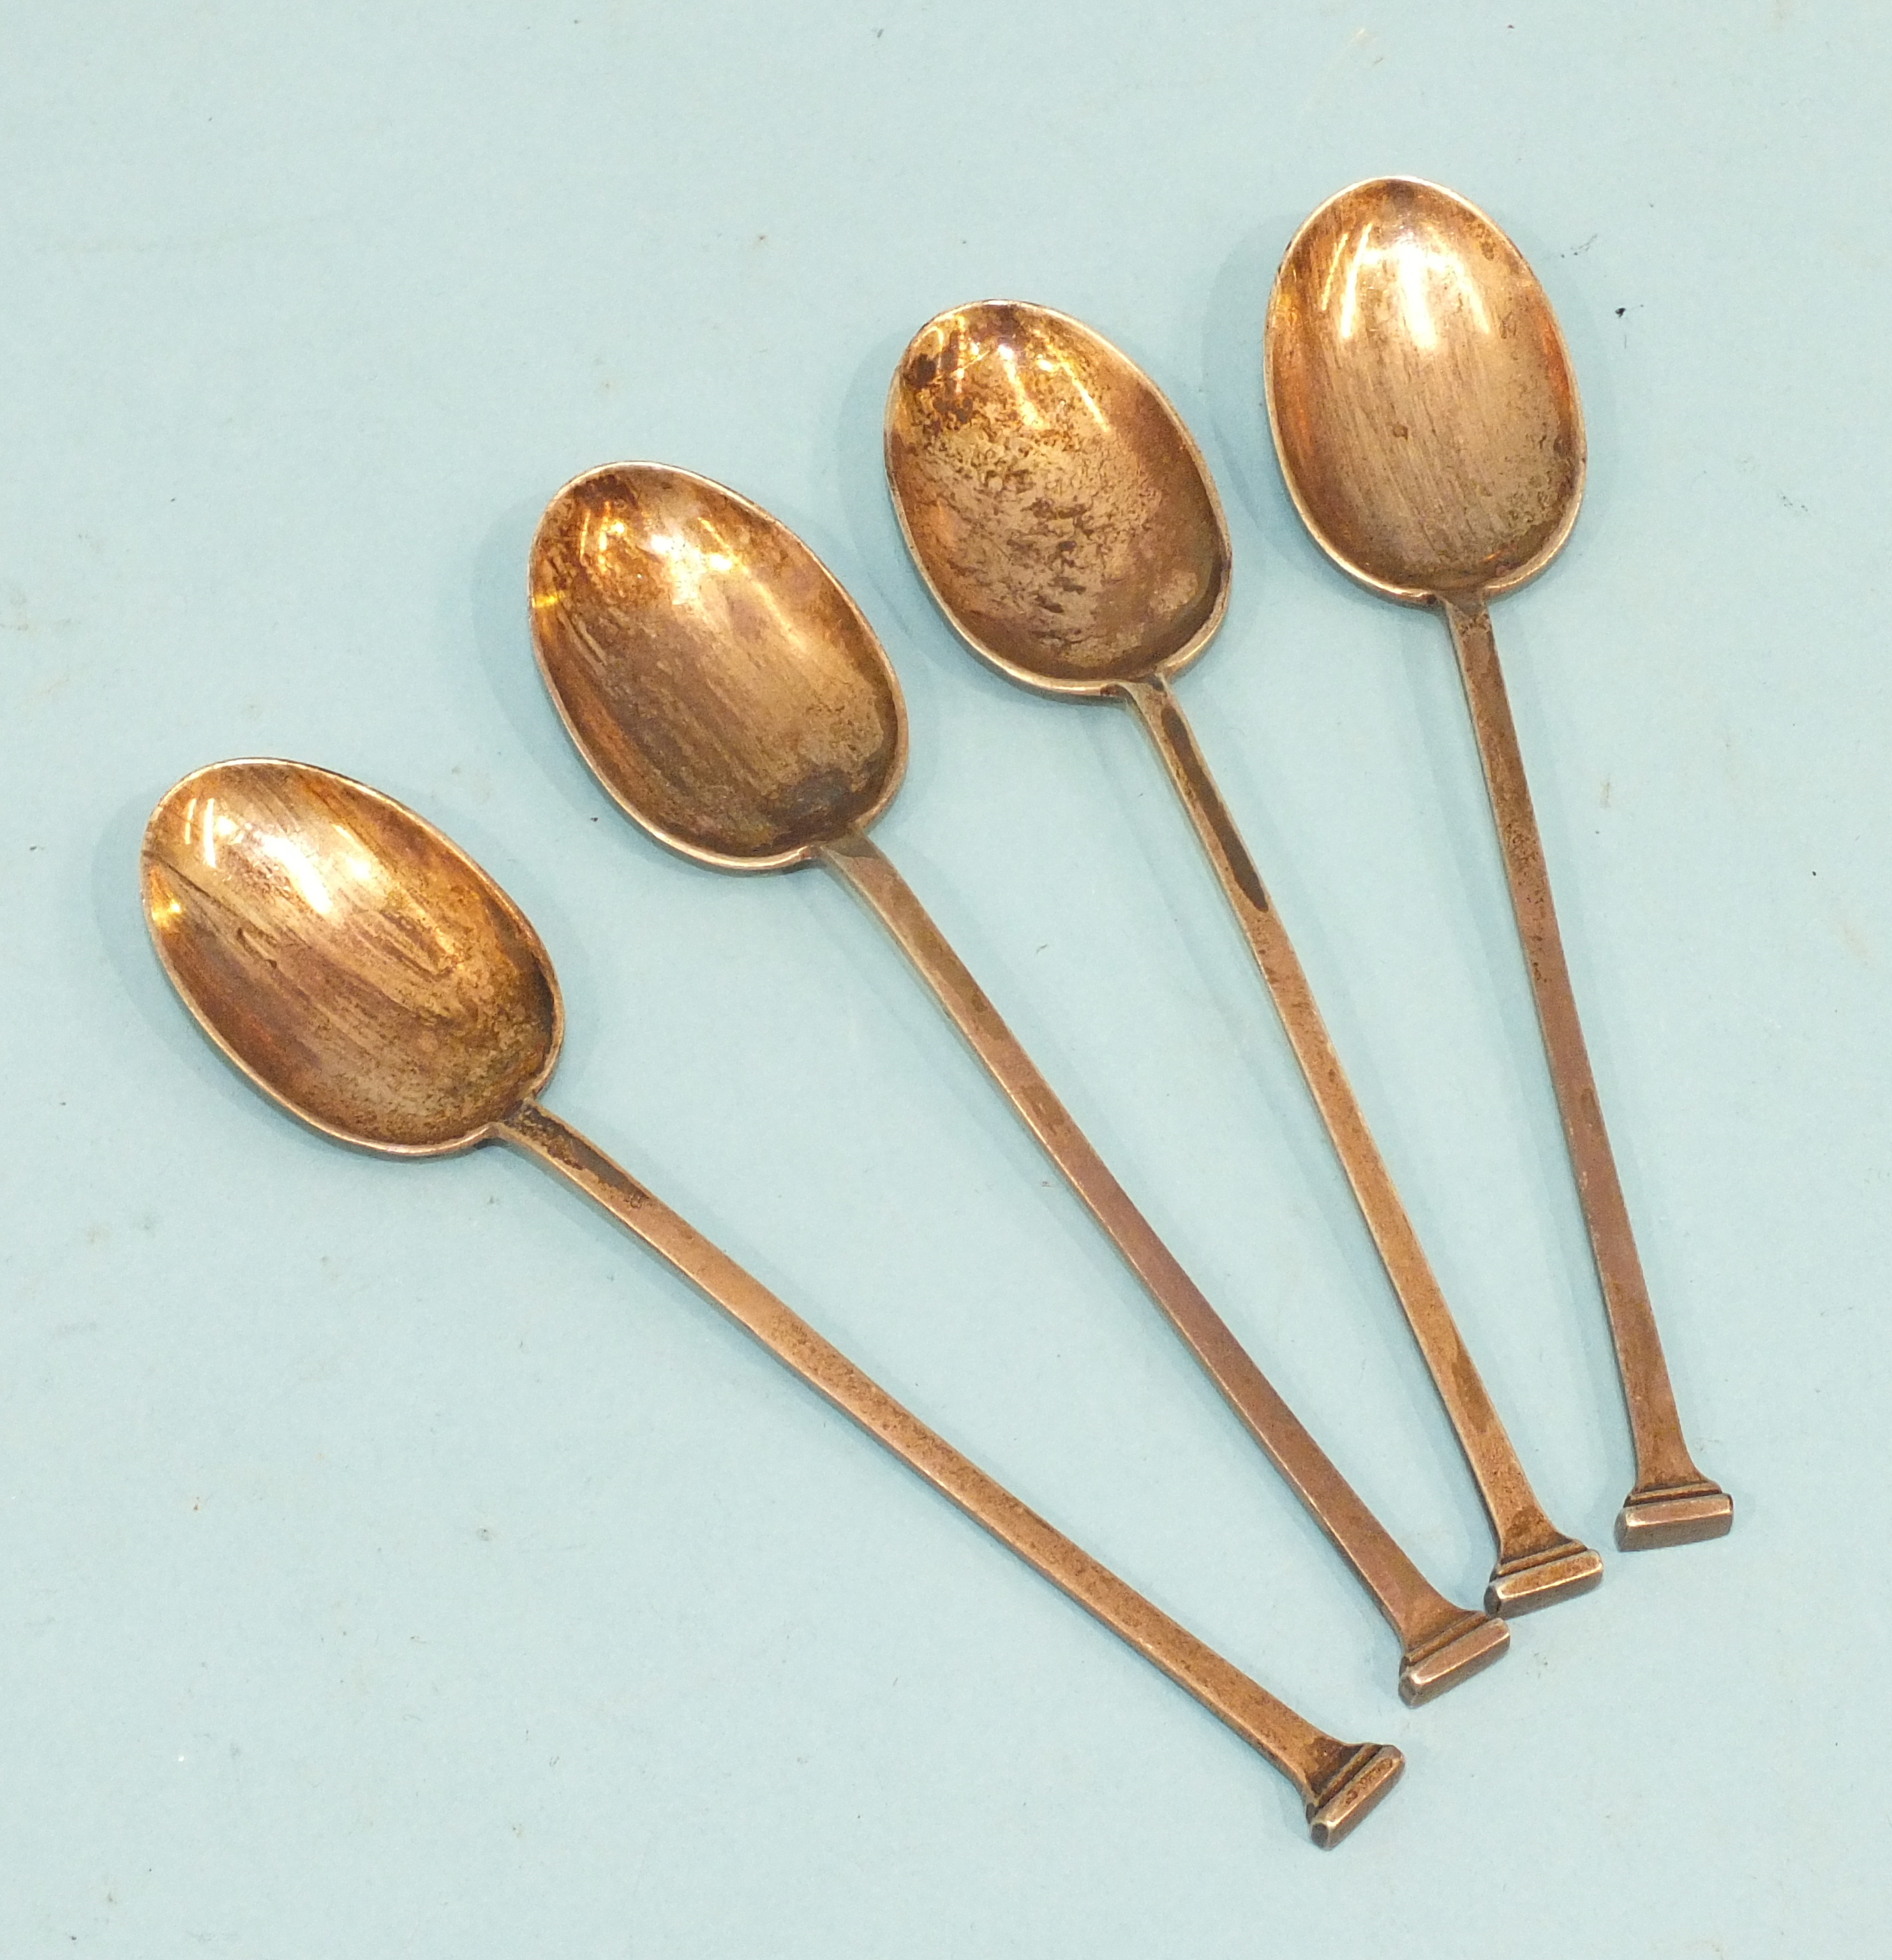 Four silver seal-top coffee spoons by Mappin & Webb.